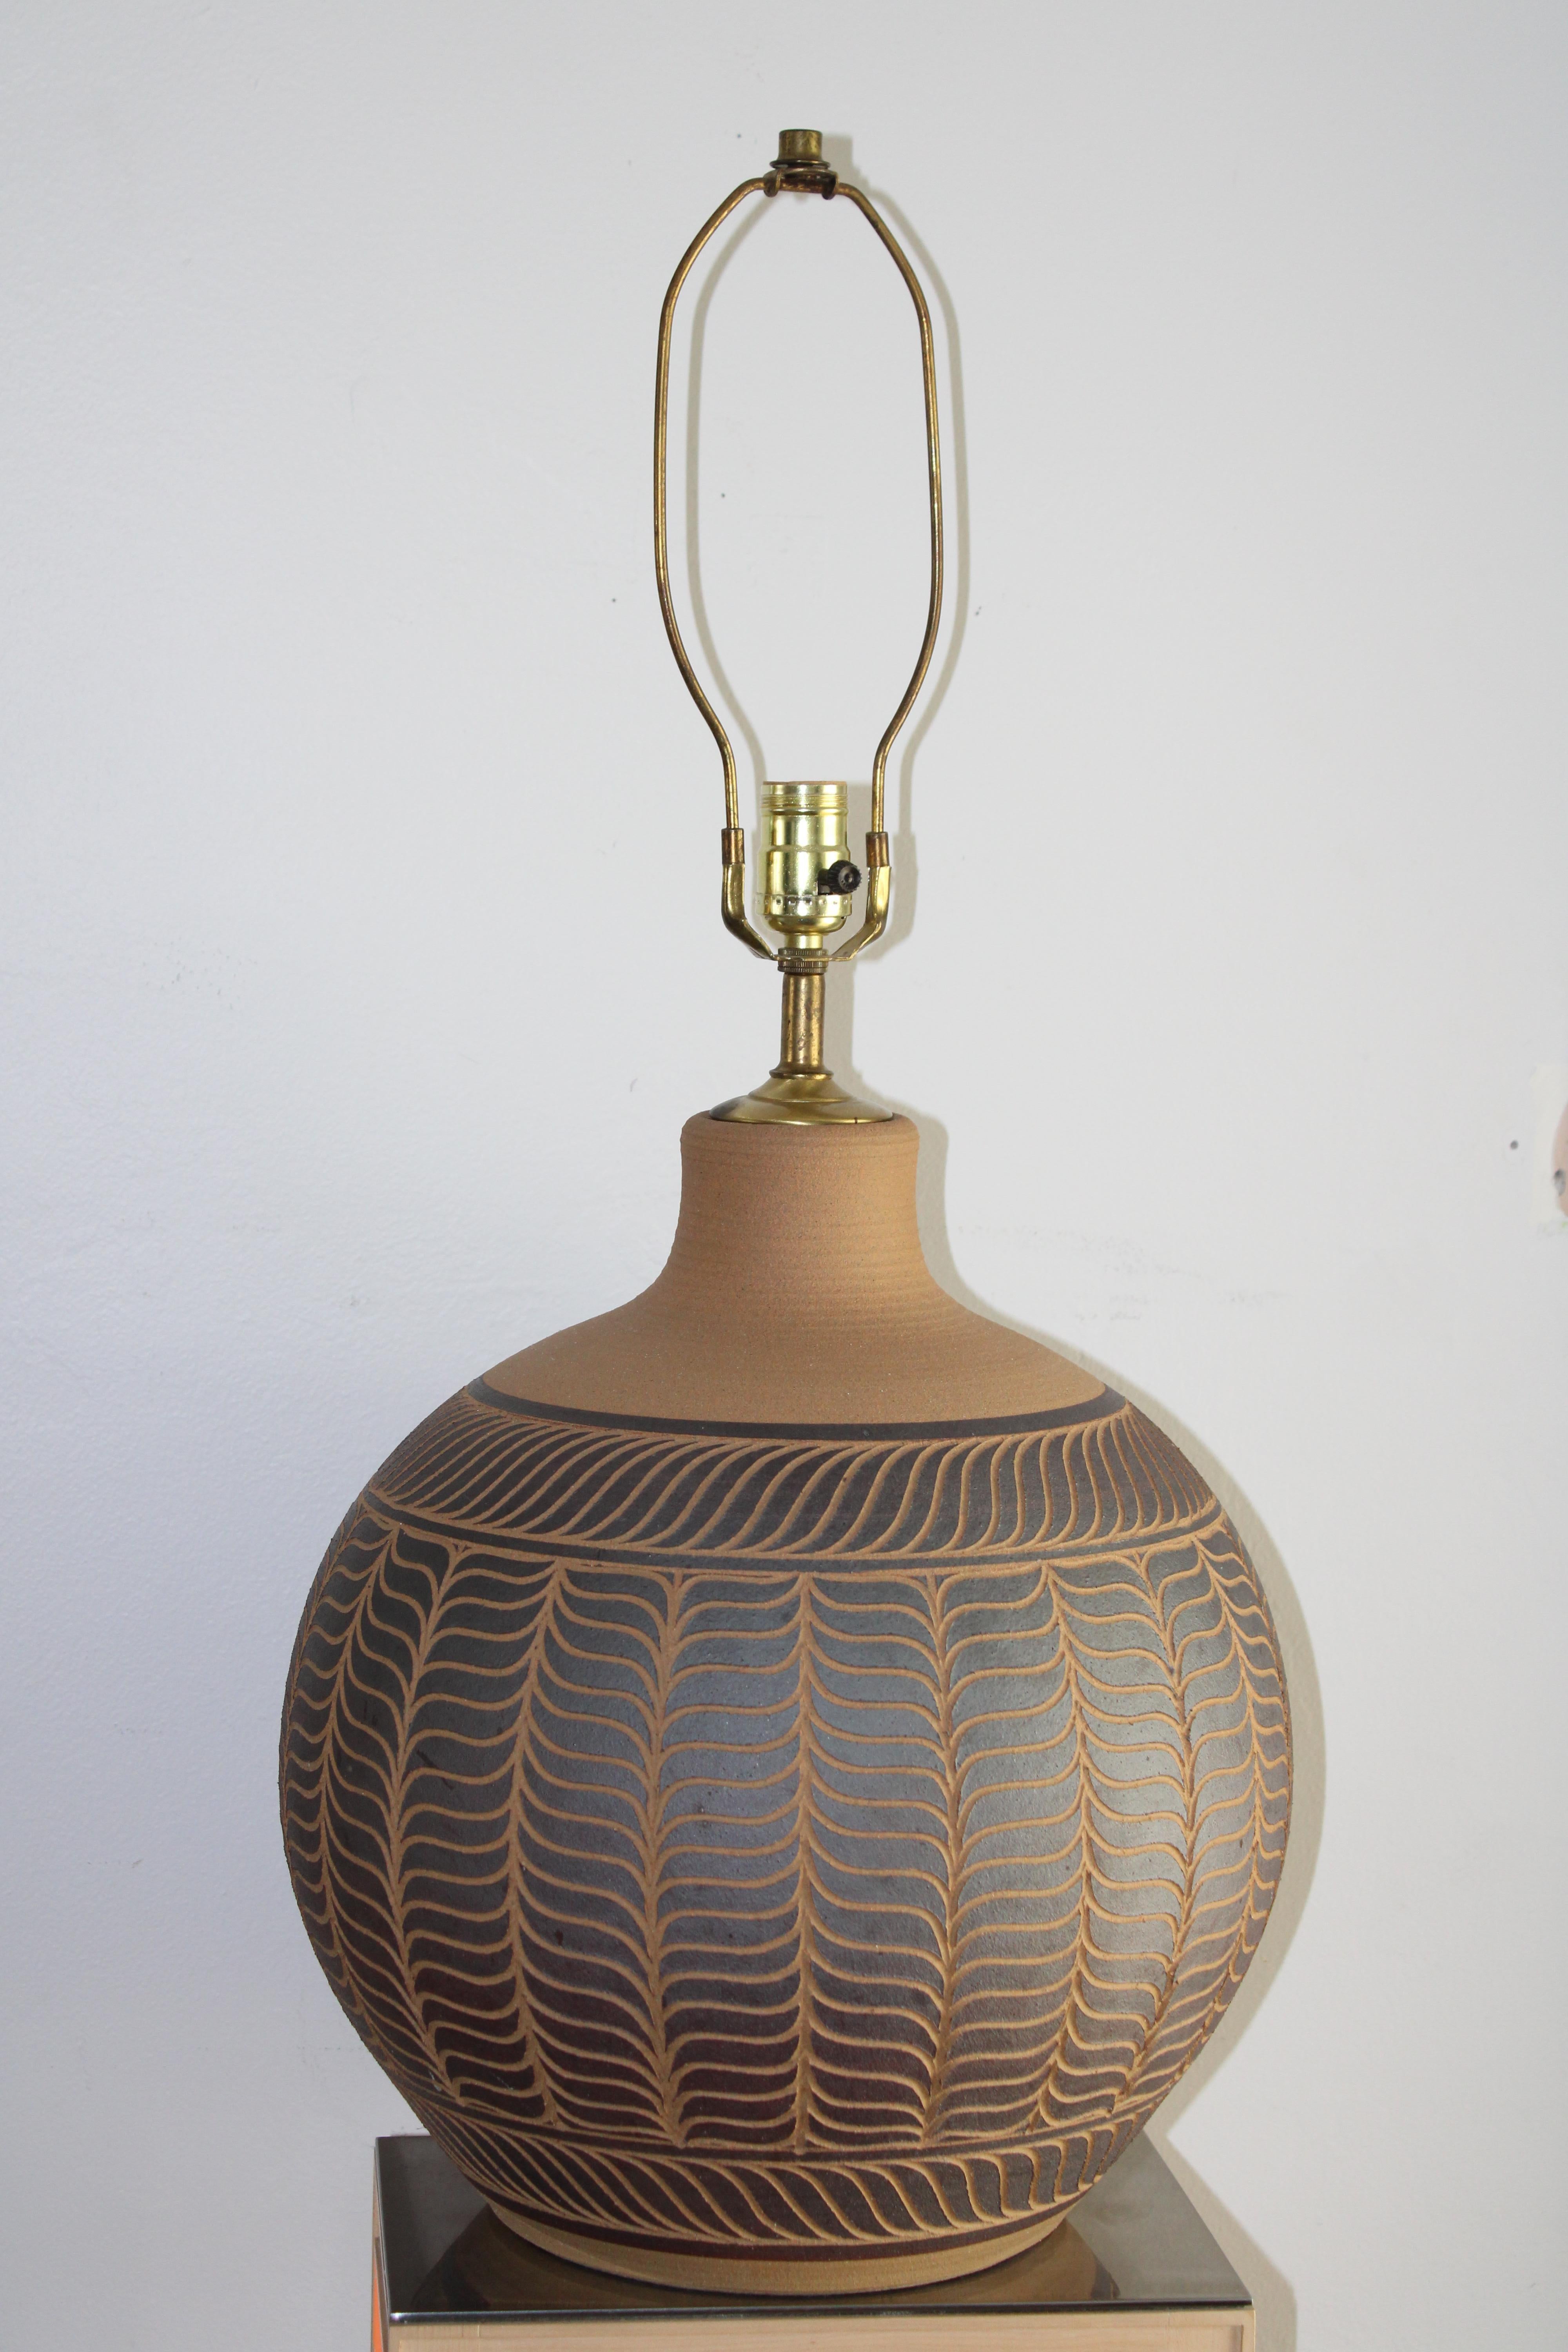 This is a beautiful round sphere handmade ceramic glazed table lamp by Oregon ceramicists Larry and Terry Brown, signed “Brown” next to the cord hole on the bottom. Ceramic portion is 16.25